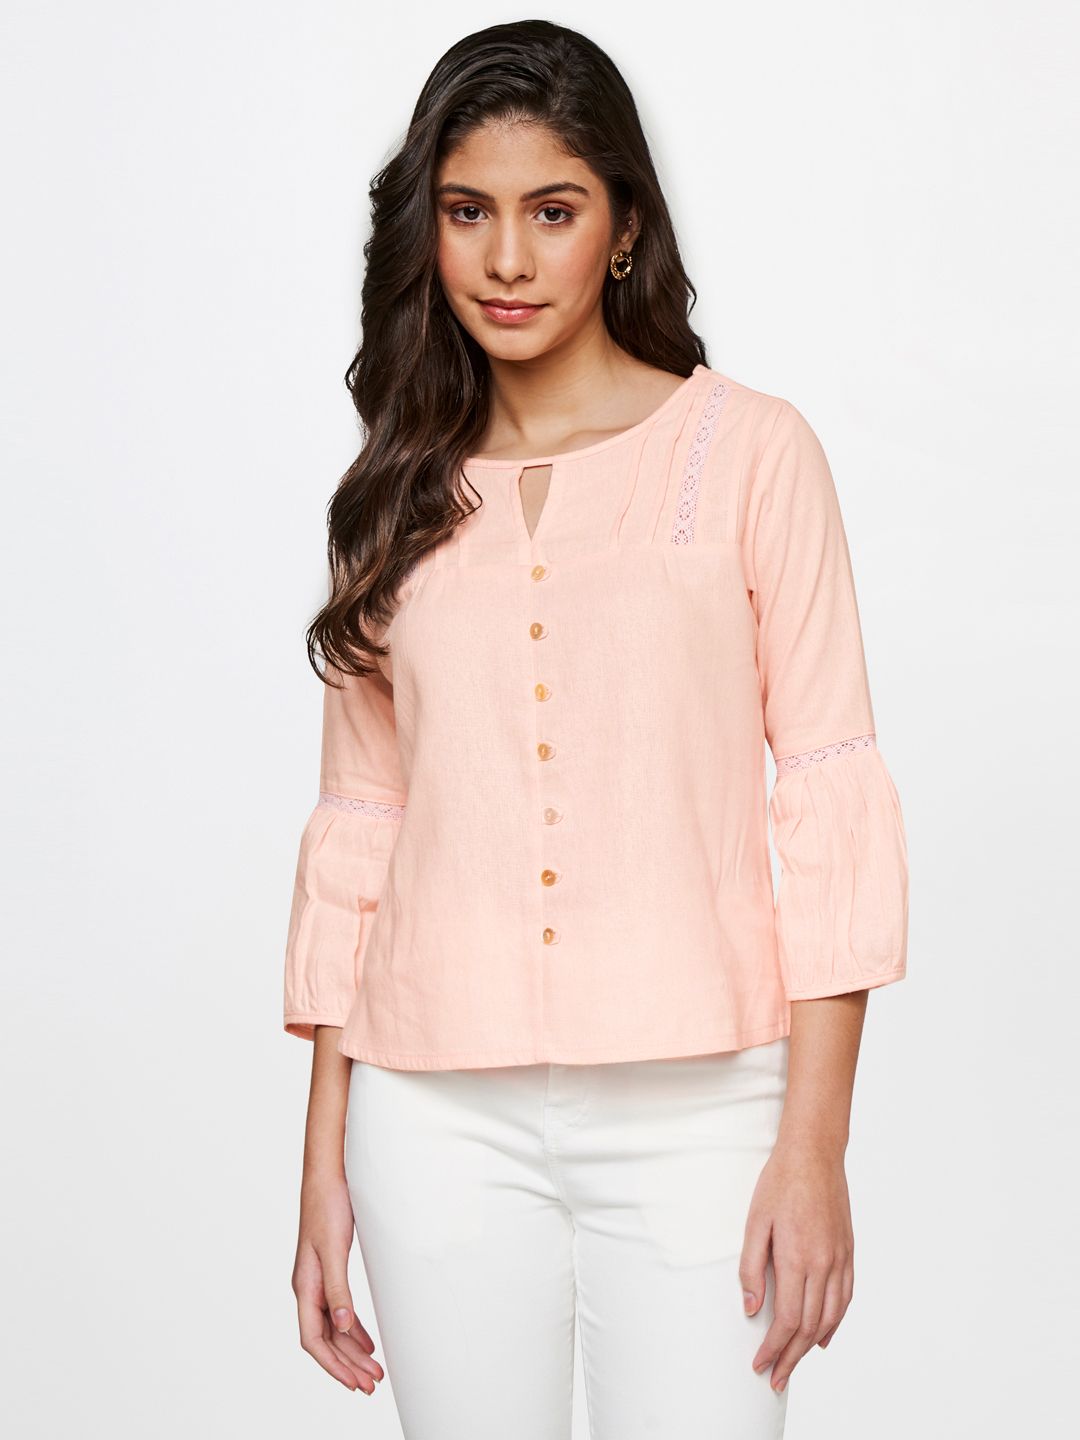 AND Keyhole Neck Puff Sleeve Linen Top Price in India